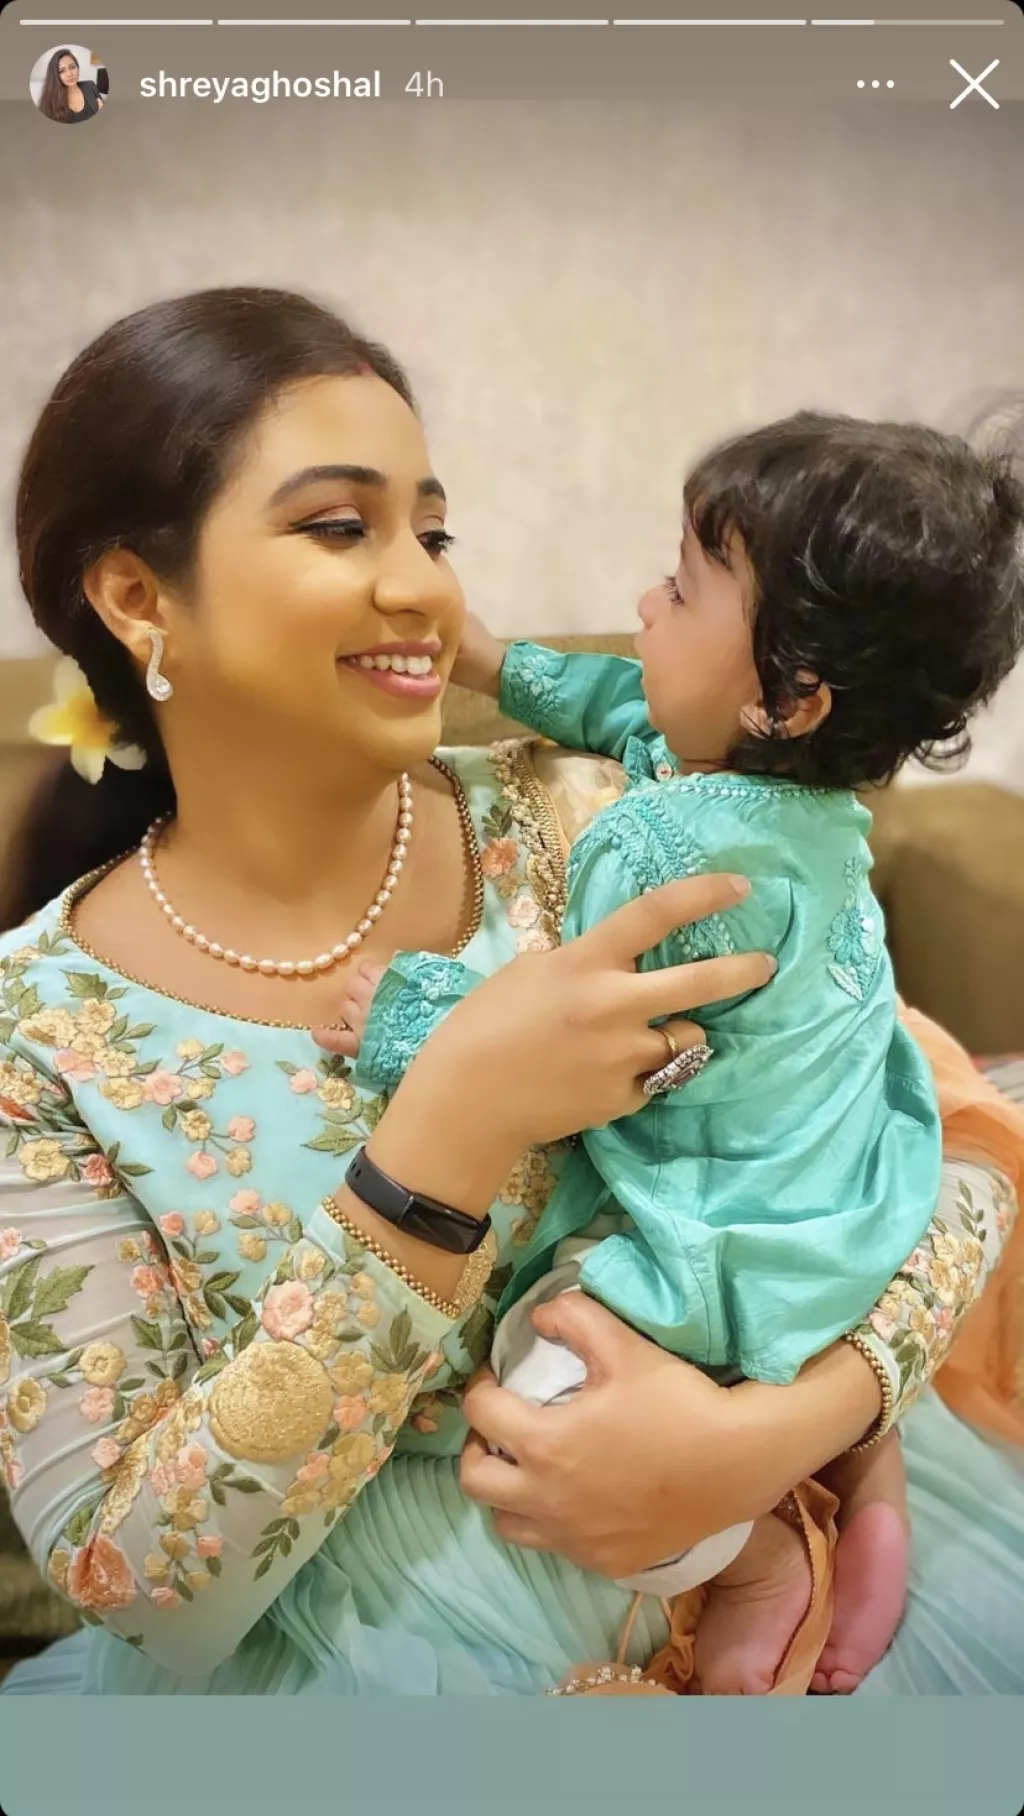 Shreya Ghoshal Twins With Her 5 Months Old Son Devyaan In Blue For His First Diwali Celebration